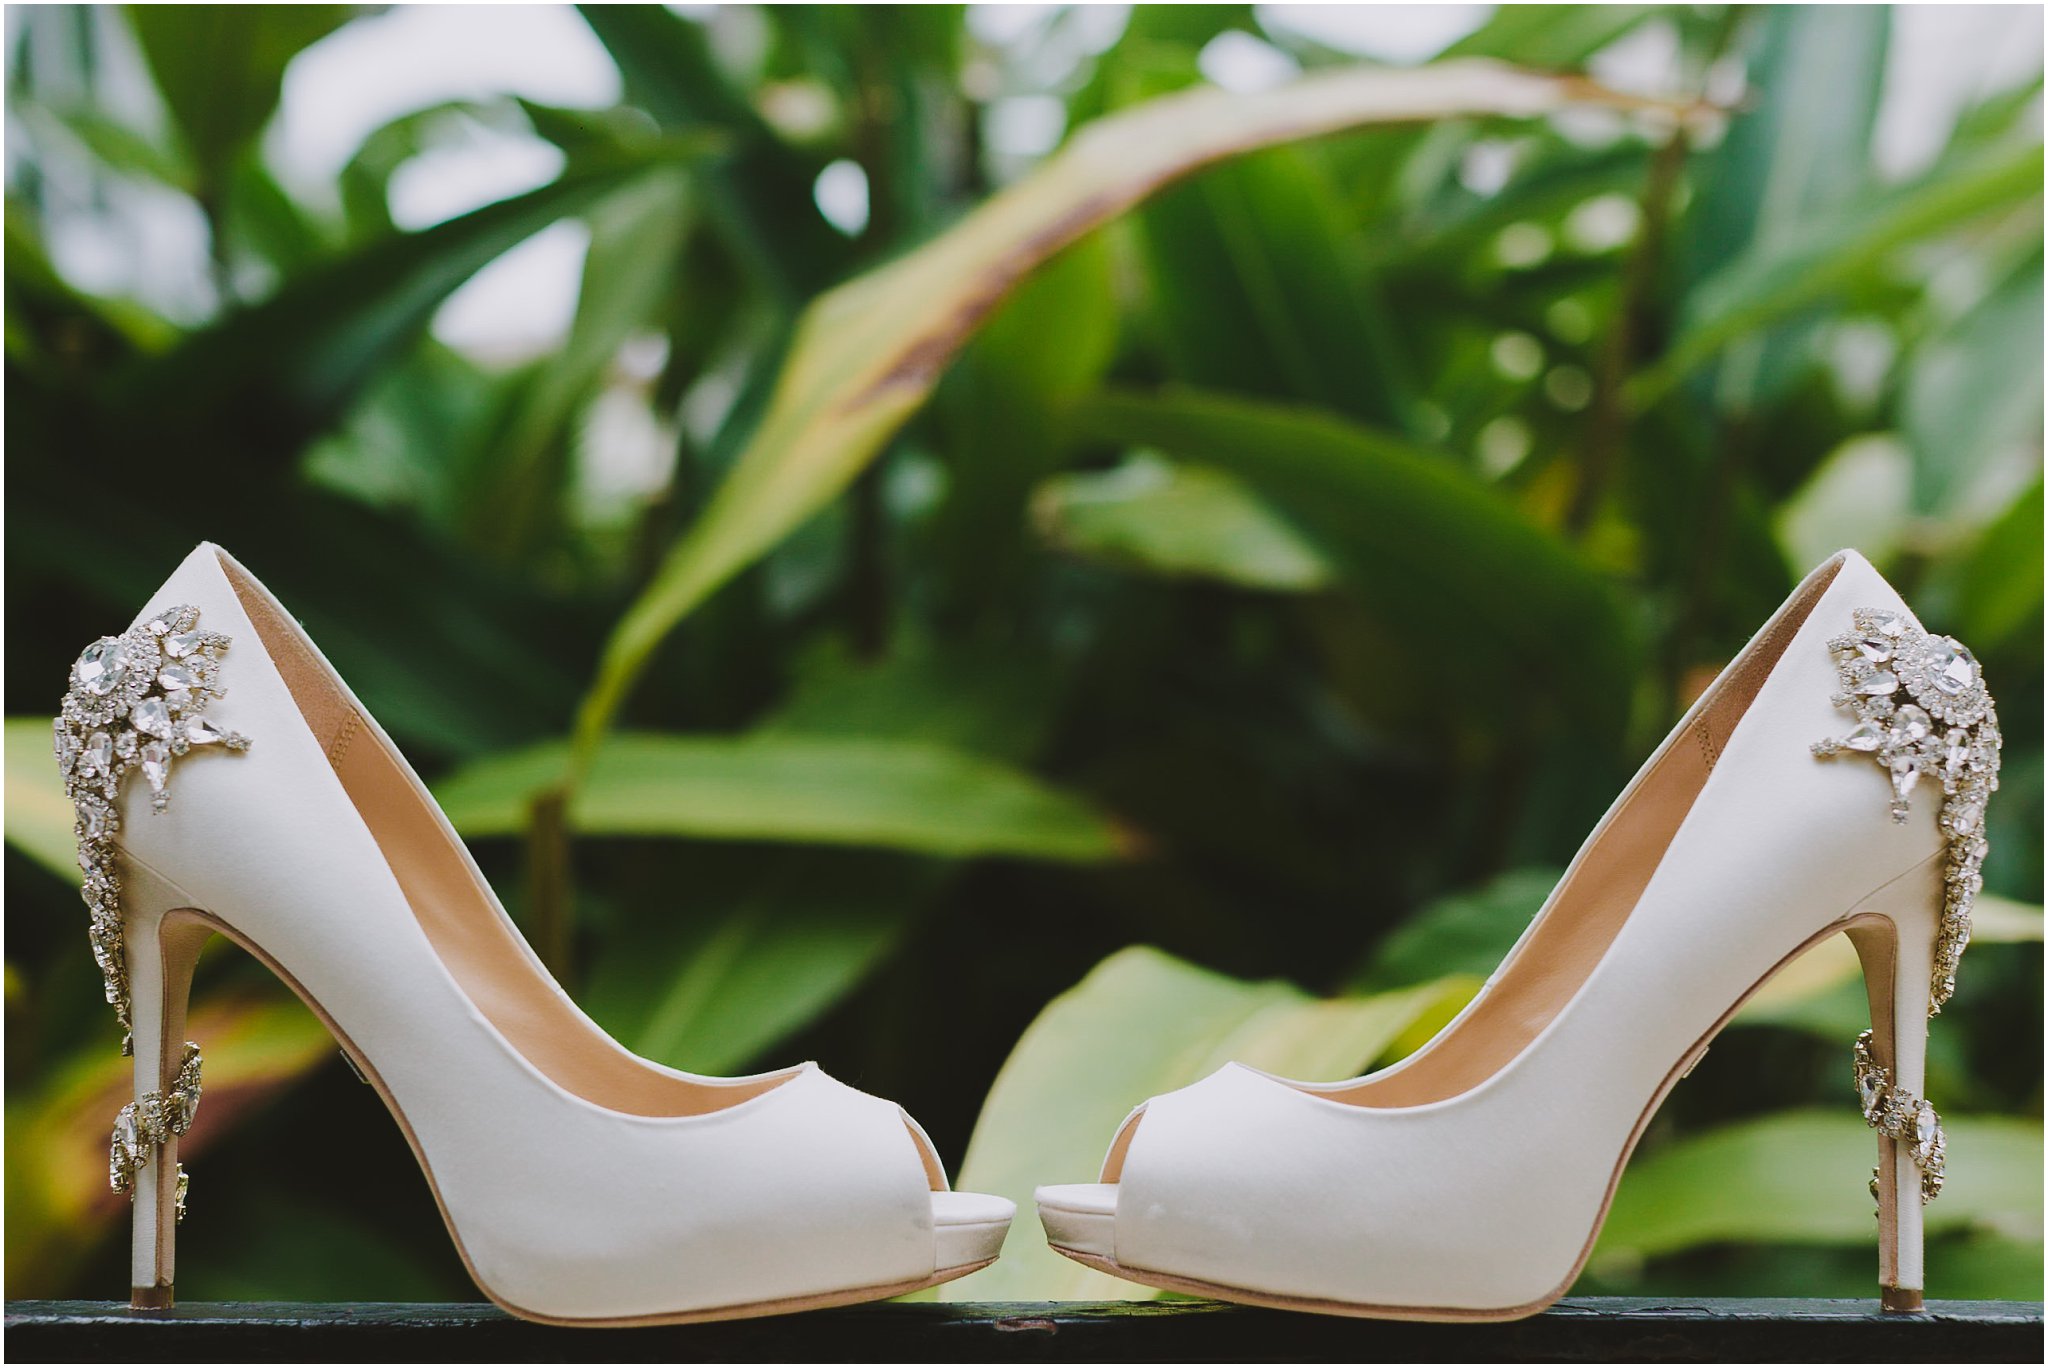 ivory badgley mischka heels placed in front of green foliage